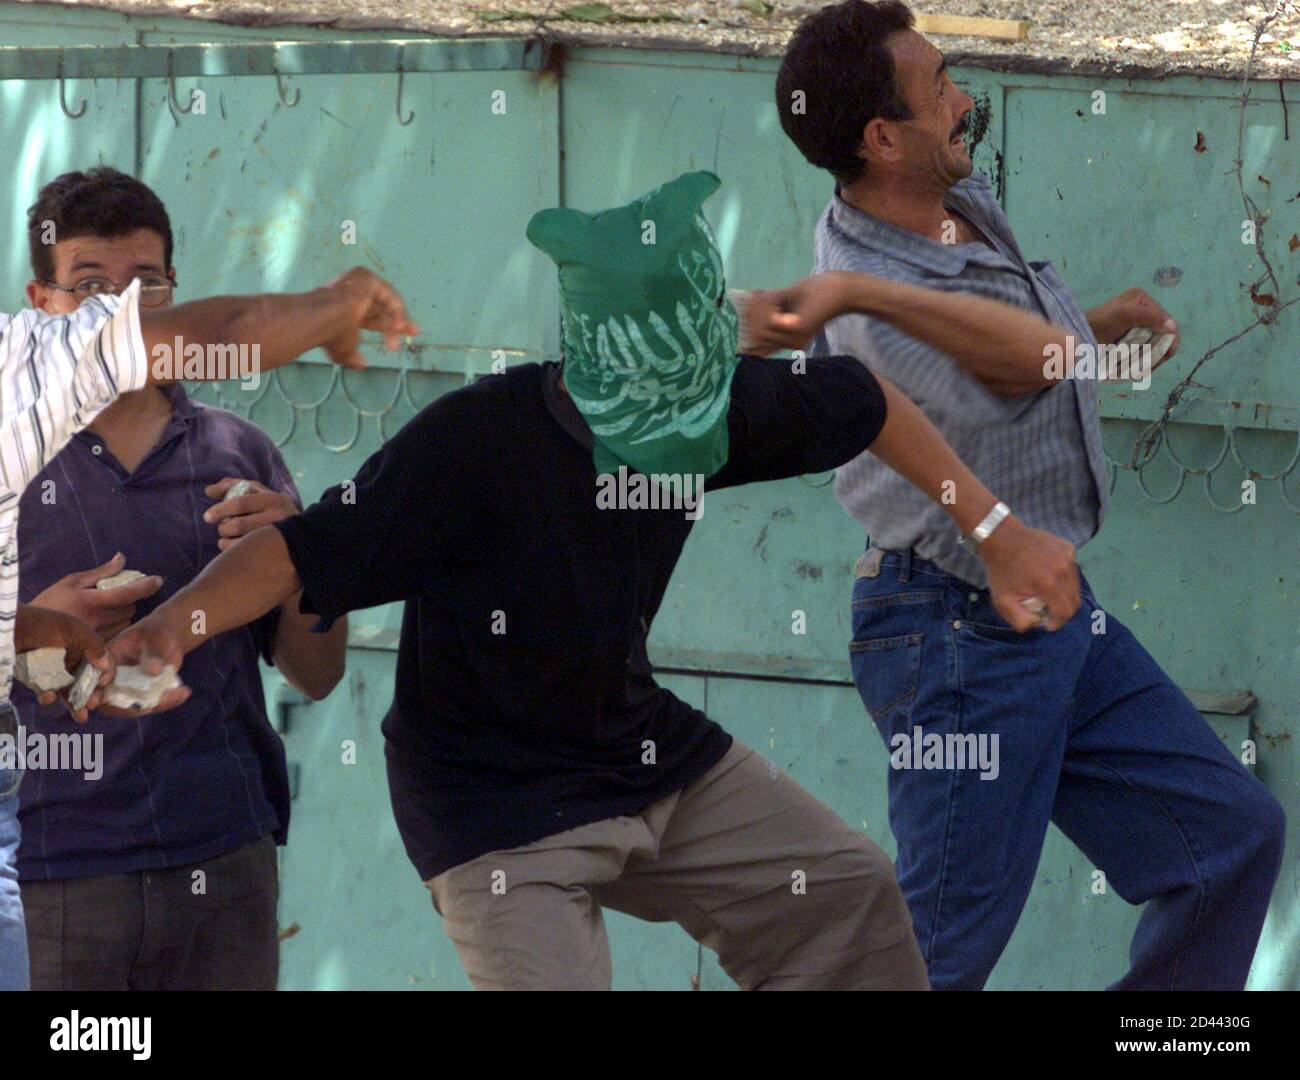 Palestinians hurl stones at Israelis soldiers during clashes in the West Bank city of Hebron August 13, 2001. Palestinians in the Gaza Strip and West Bank closed stores and offices on Monday in protest against Israel's takeover of the deeply symbolic Palestinian headquarters in Jerusalem.  NH/RKR Stock Photo